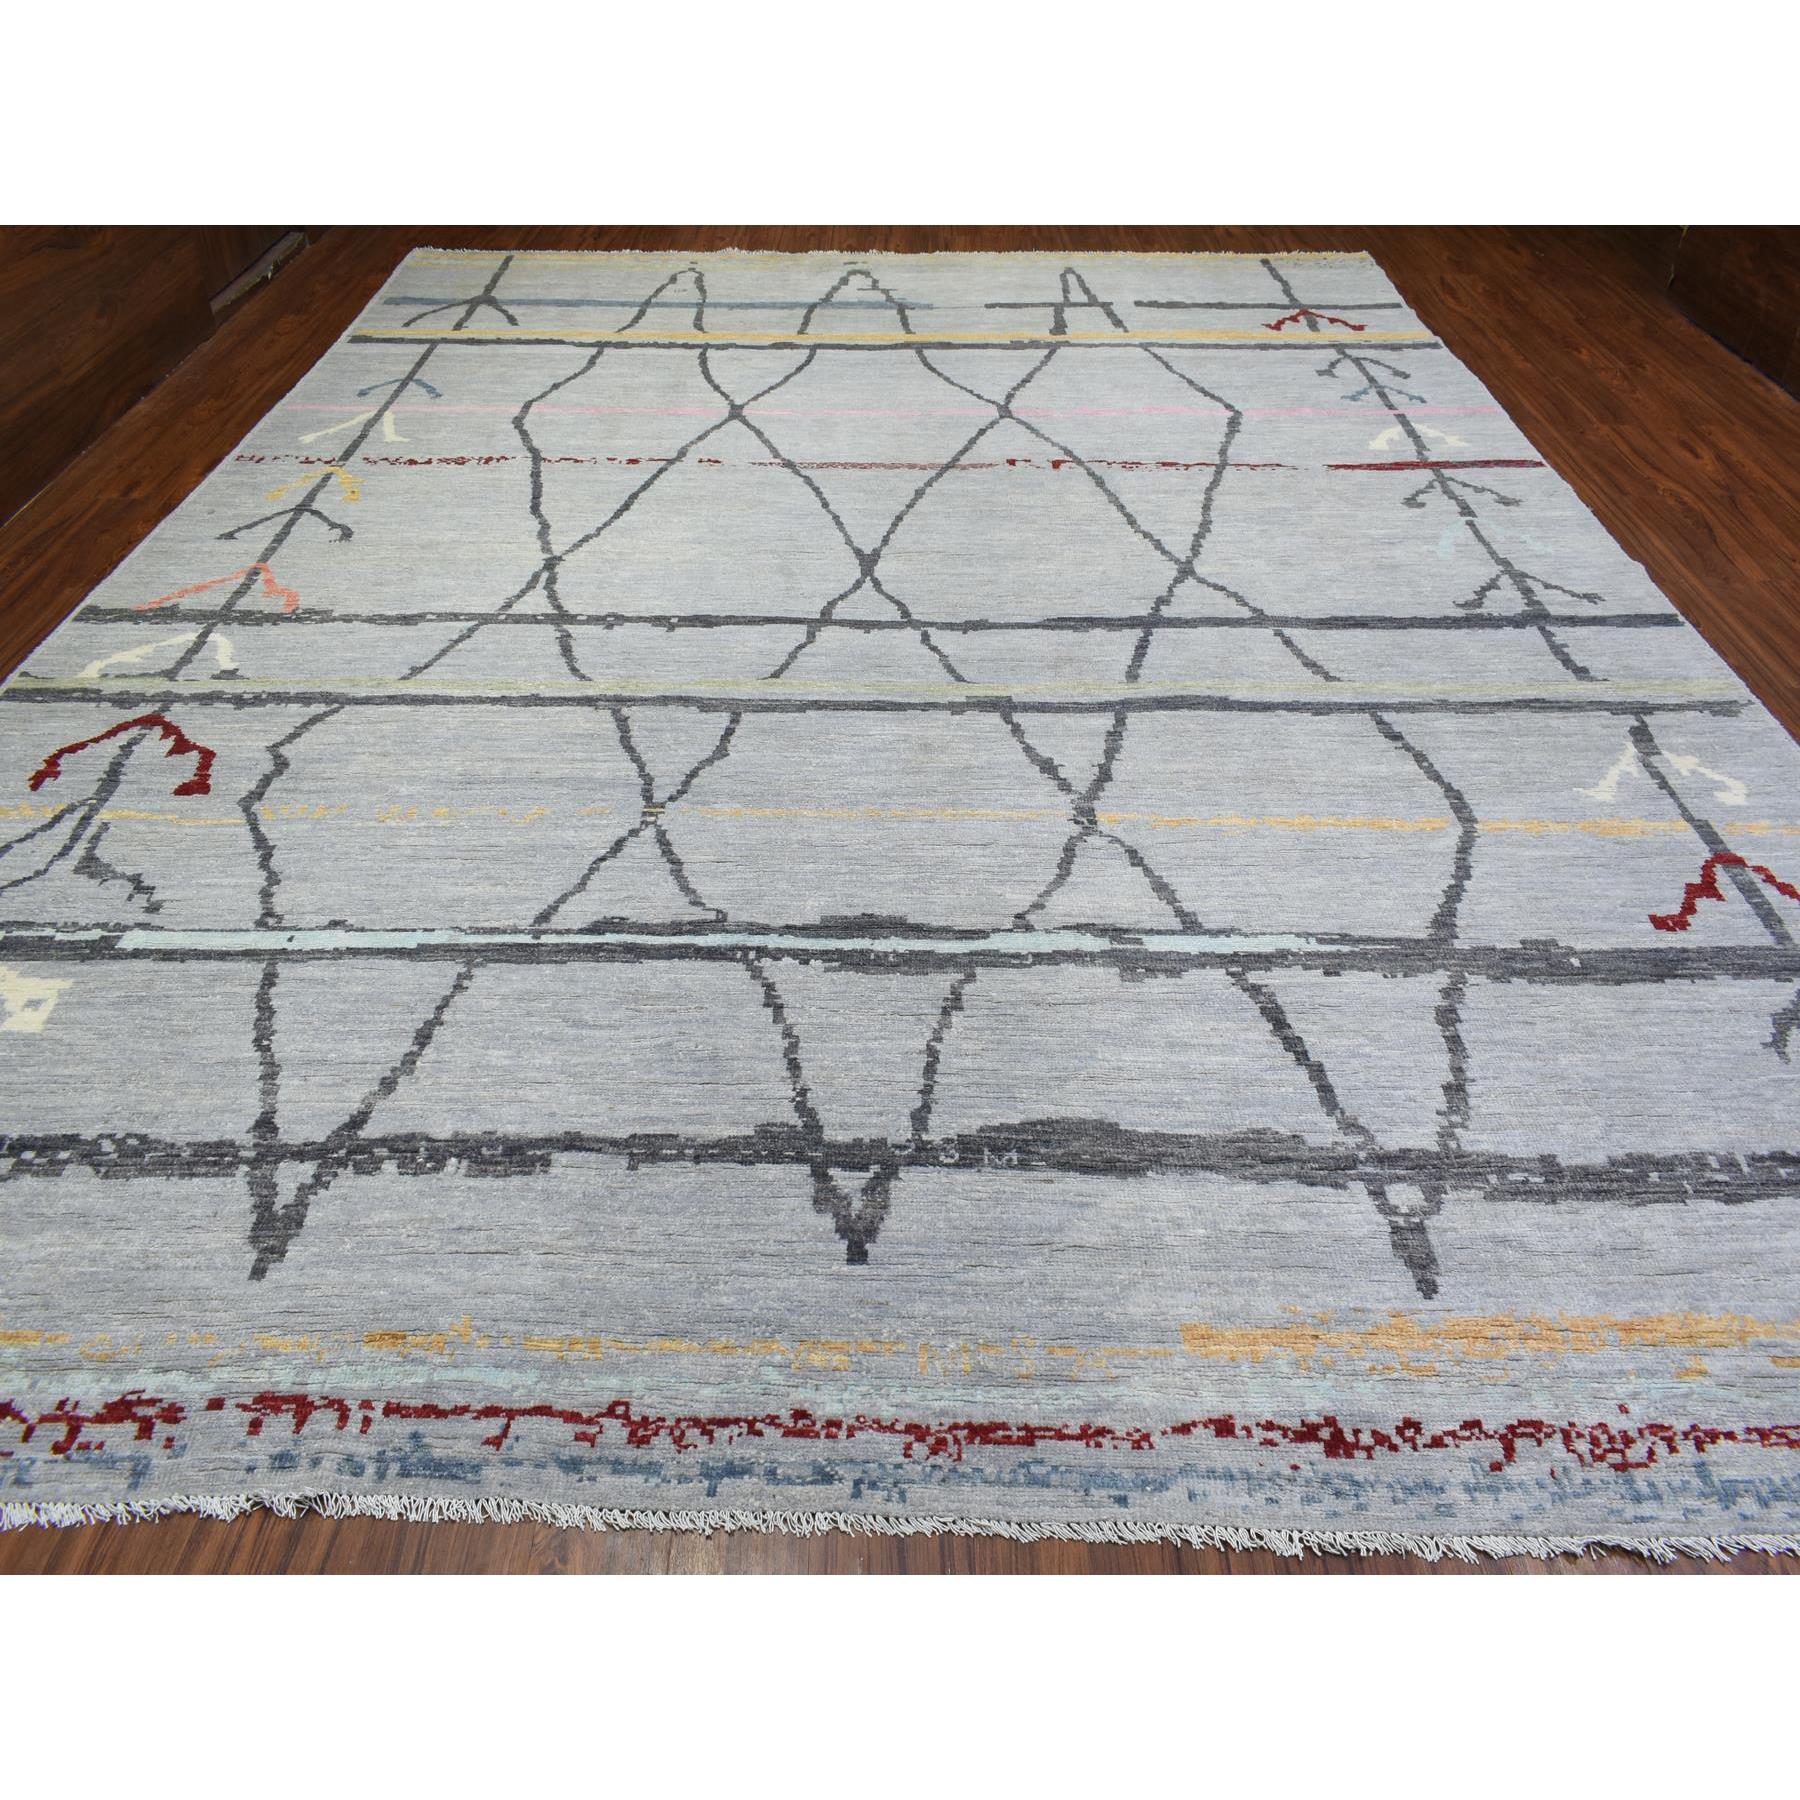 12'x15'2" Light Gray, Soft and Velvety Wool Hand Woven, Boujaad Moroccan Berber Design with Criss Cross Pattern Natural Dyes, Oversized Oriental Rug 